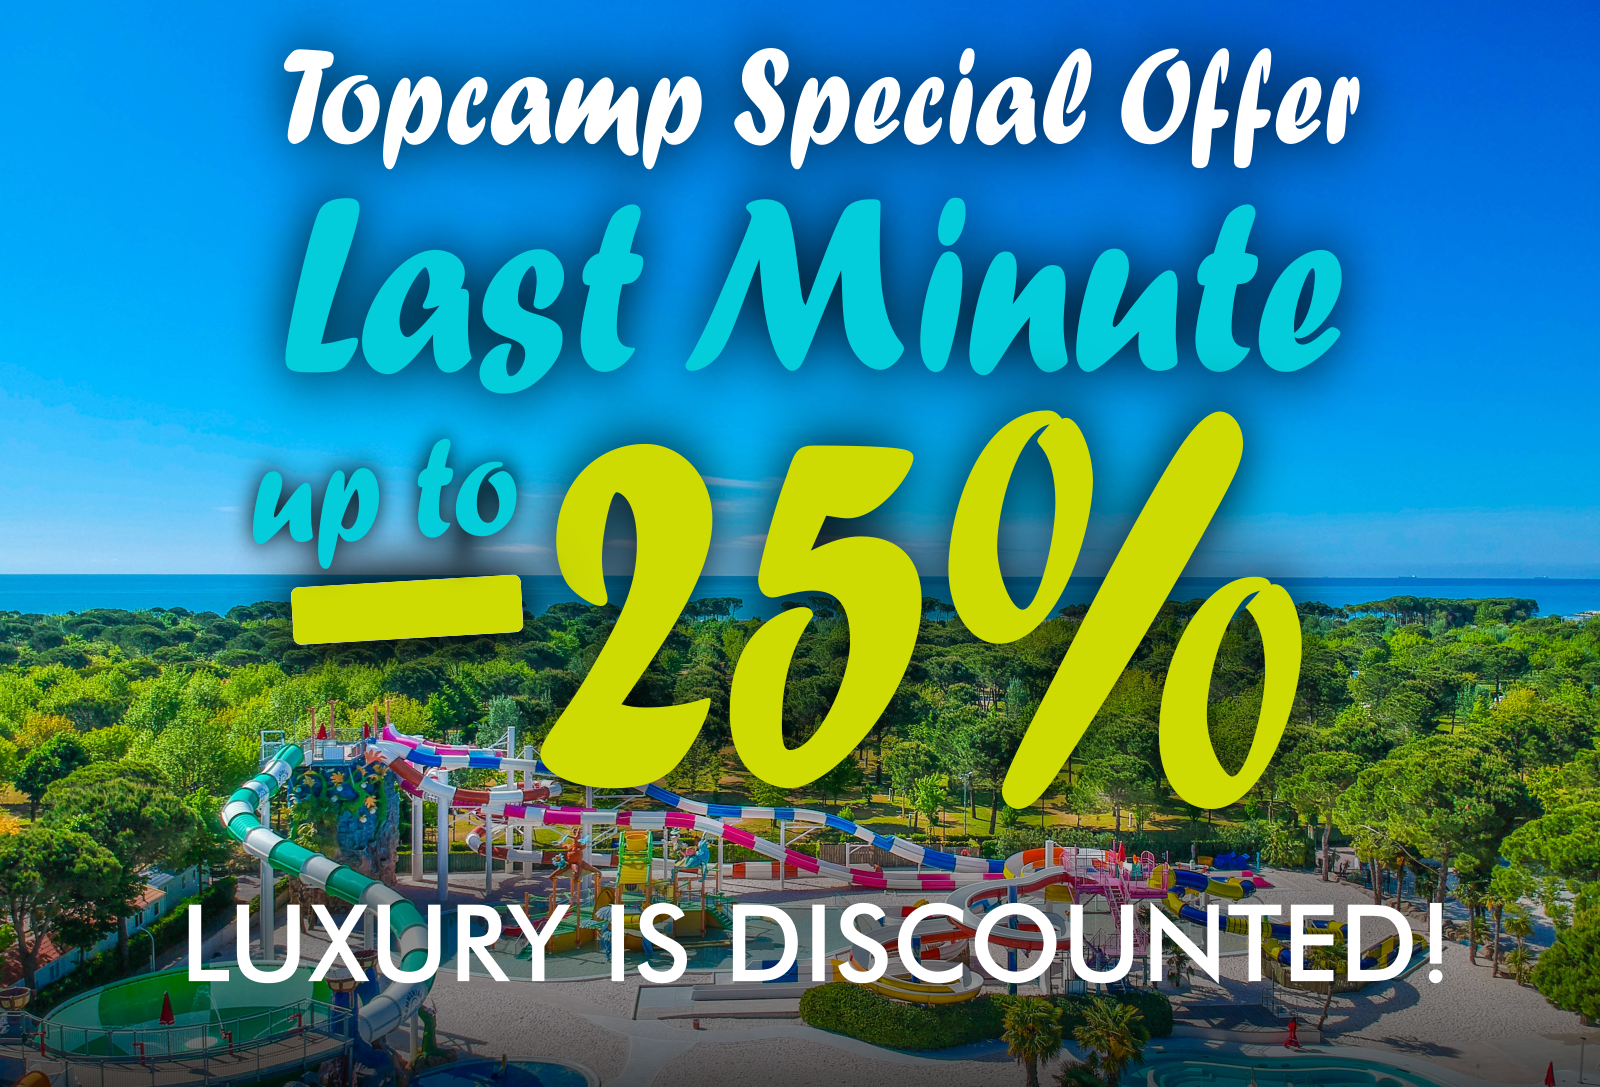 Topcamp Special Offer - Last Minute up to -25% - Luxury is discounted!